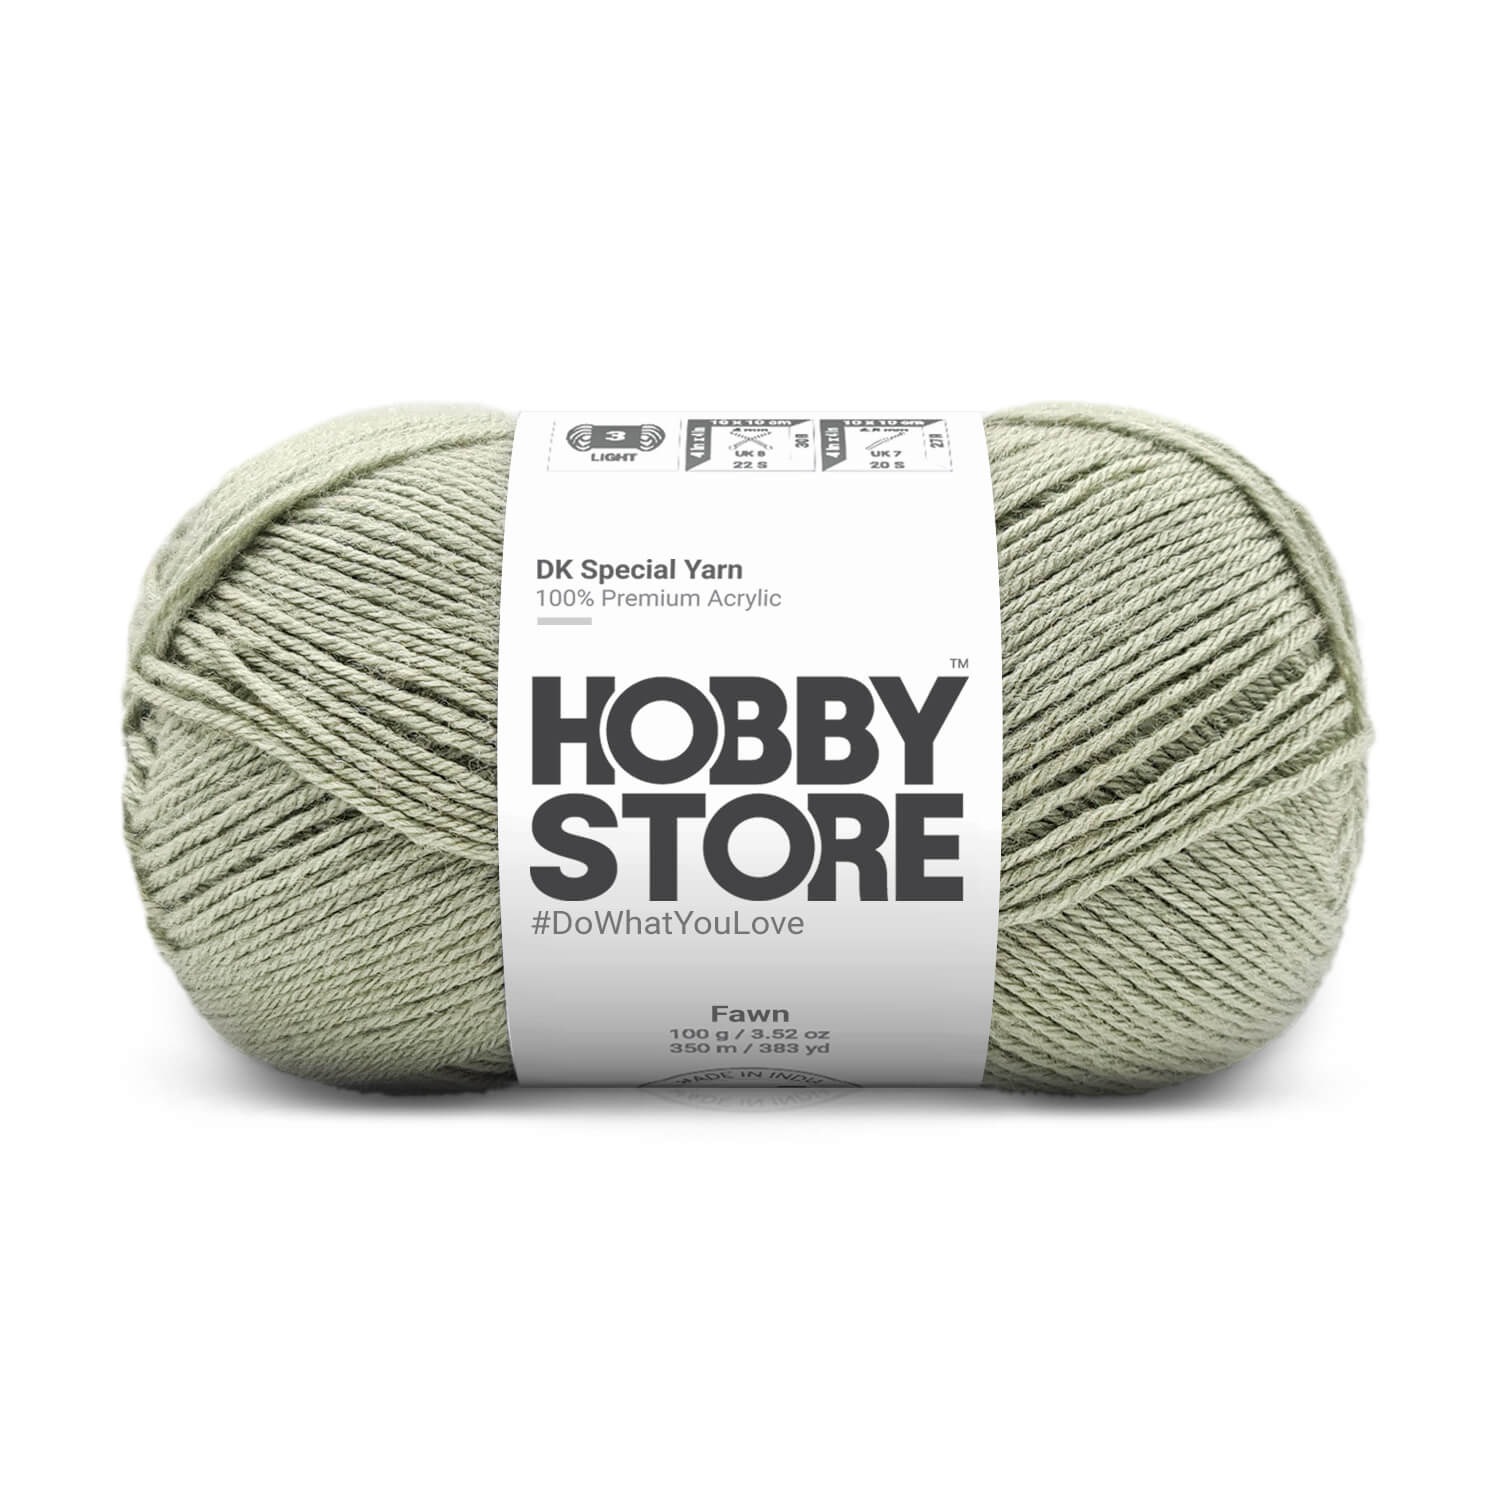 Hobby Store DK Special Yarn - Fawn 5025